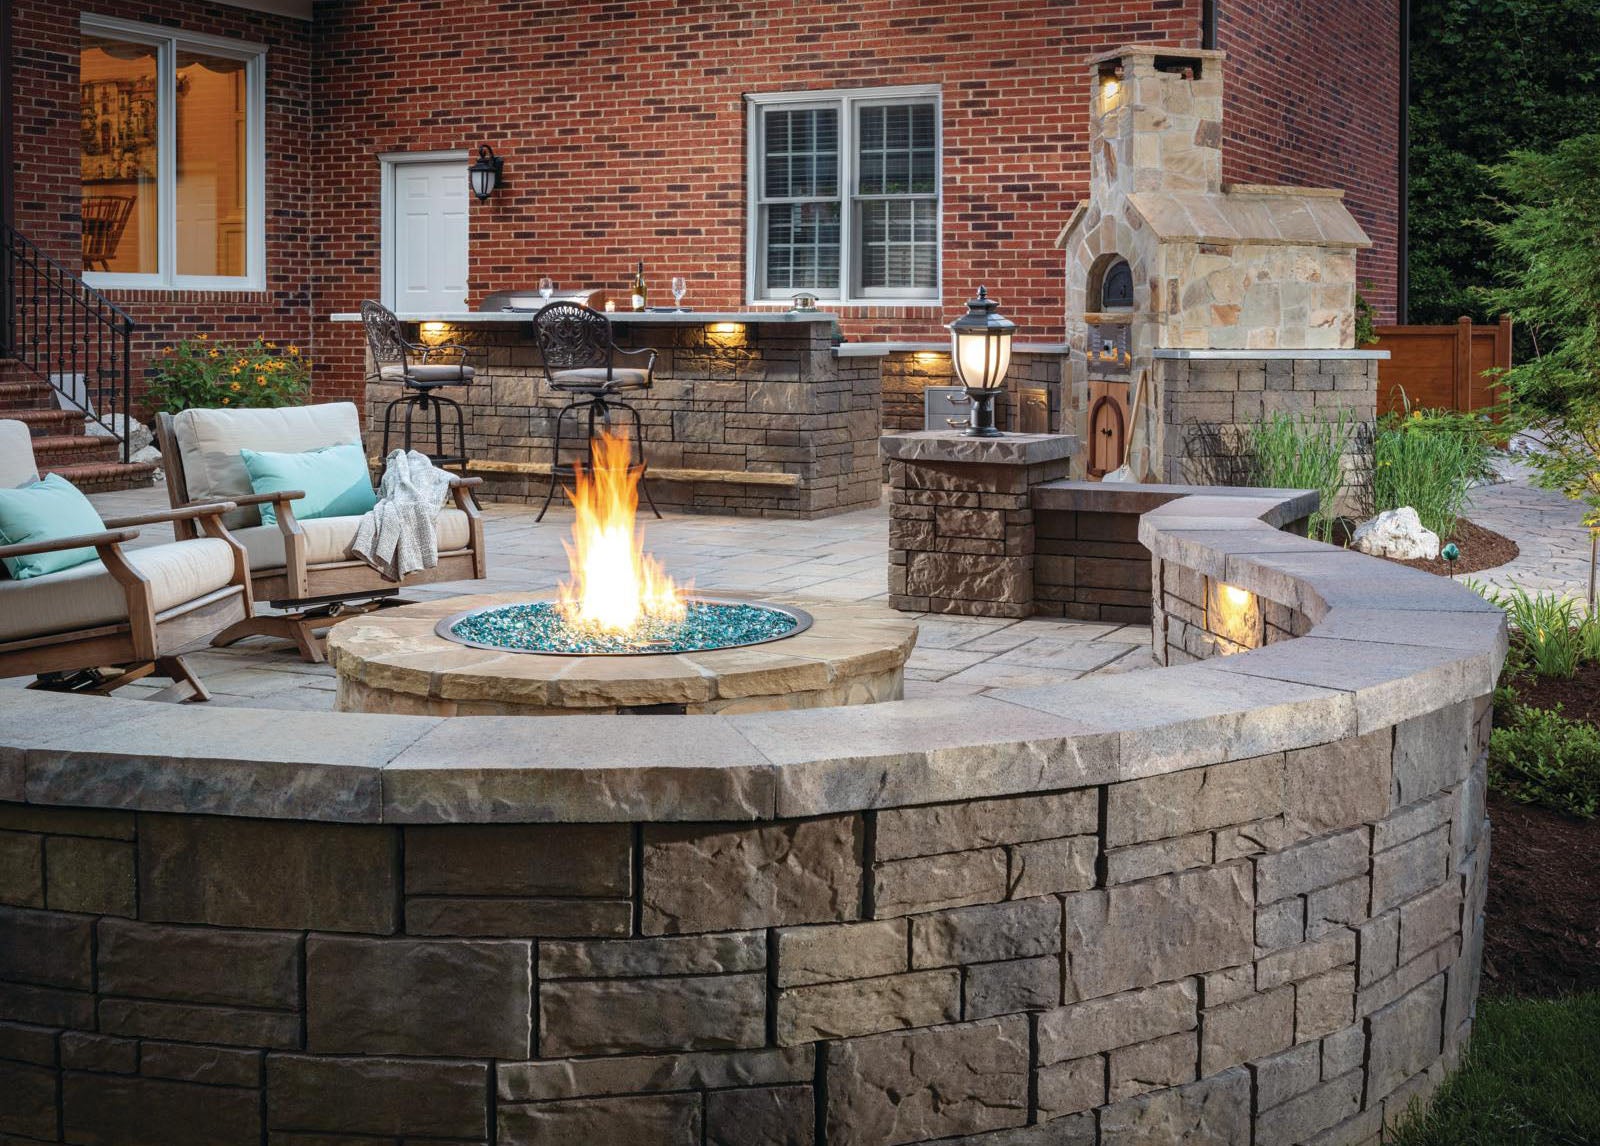 Designing A Patio Around Fire Pit, Can I Have A Fire Pit In My Backyard